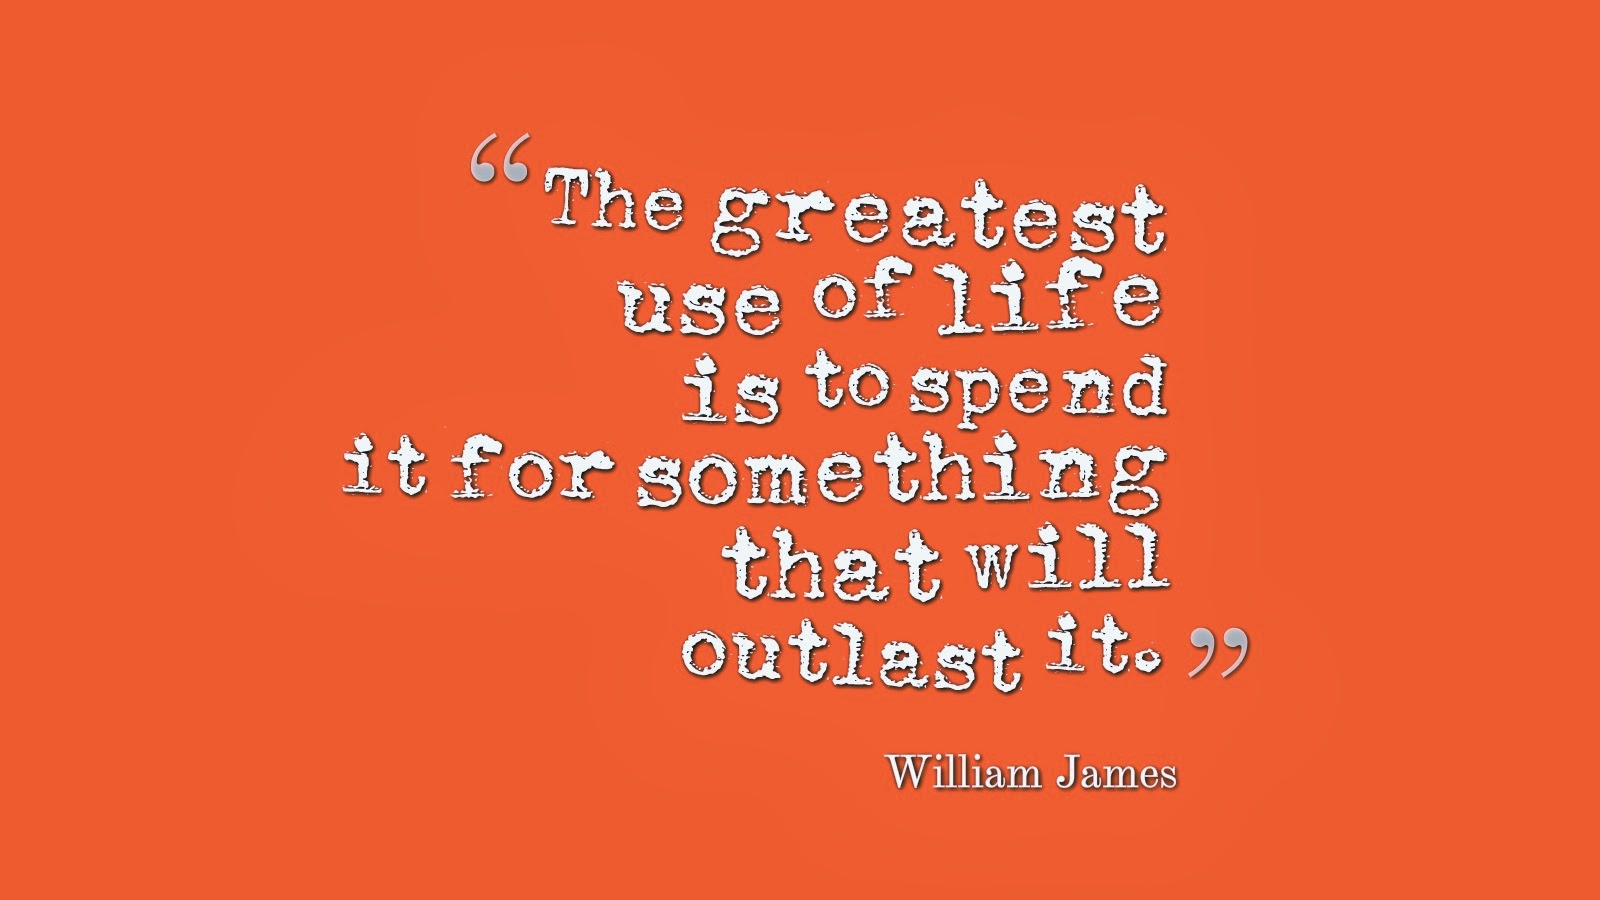 Life of something. The great use of Life is to spend it for something that will Outlast it William James. The great use of Life is to spend it for something that will Outlast it.